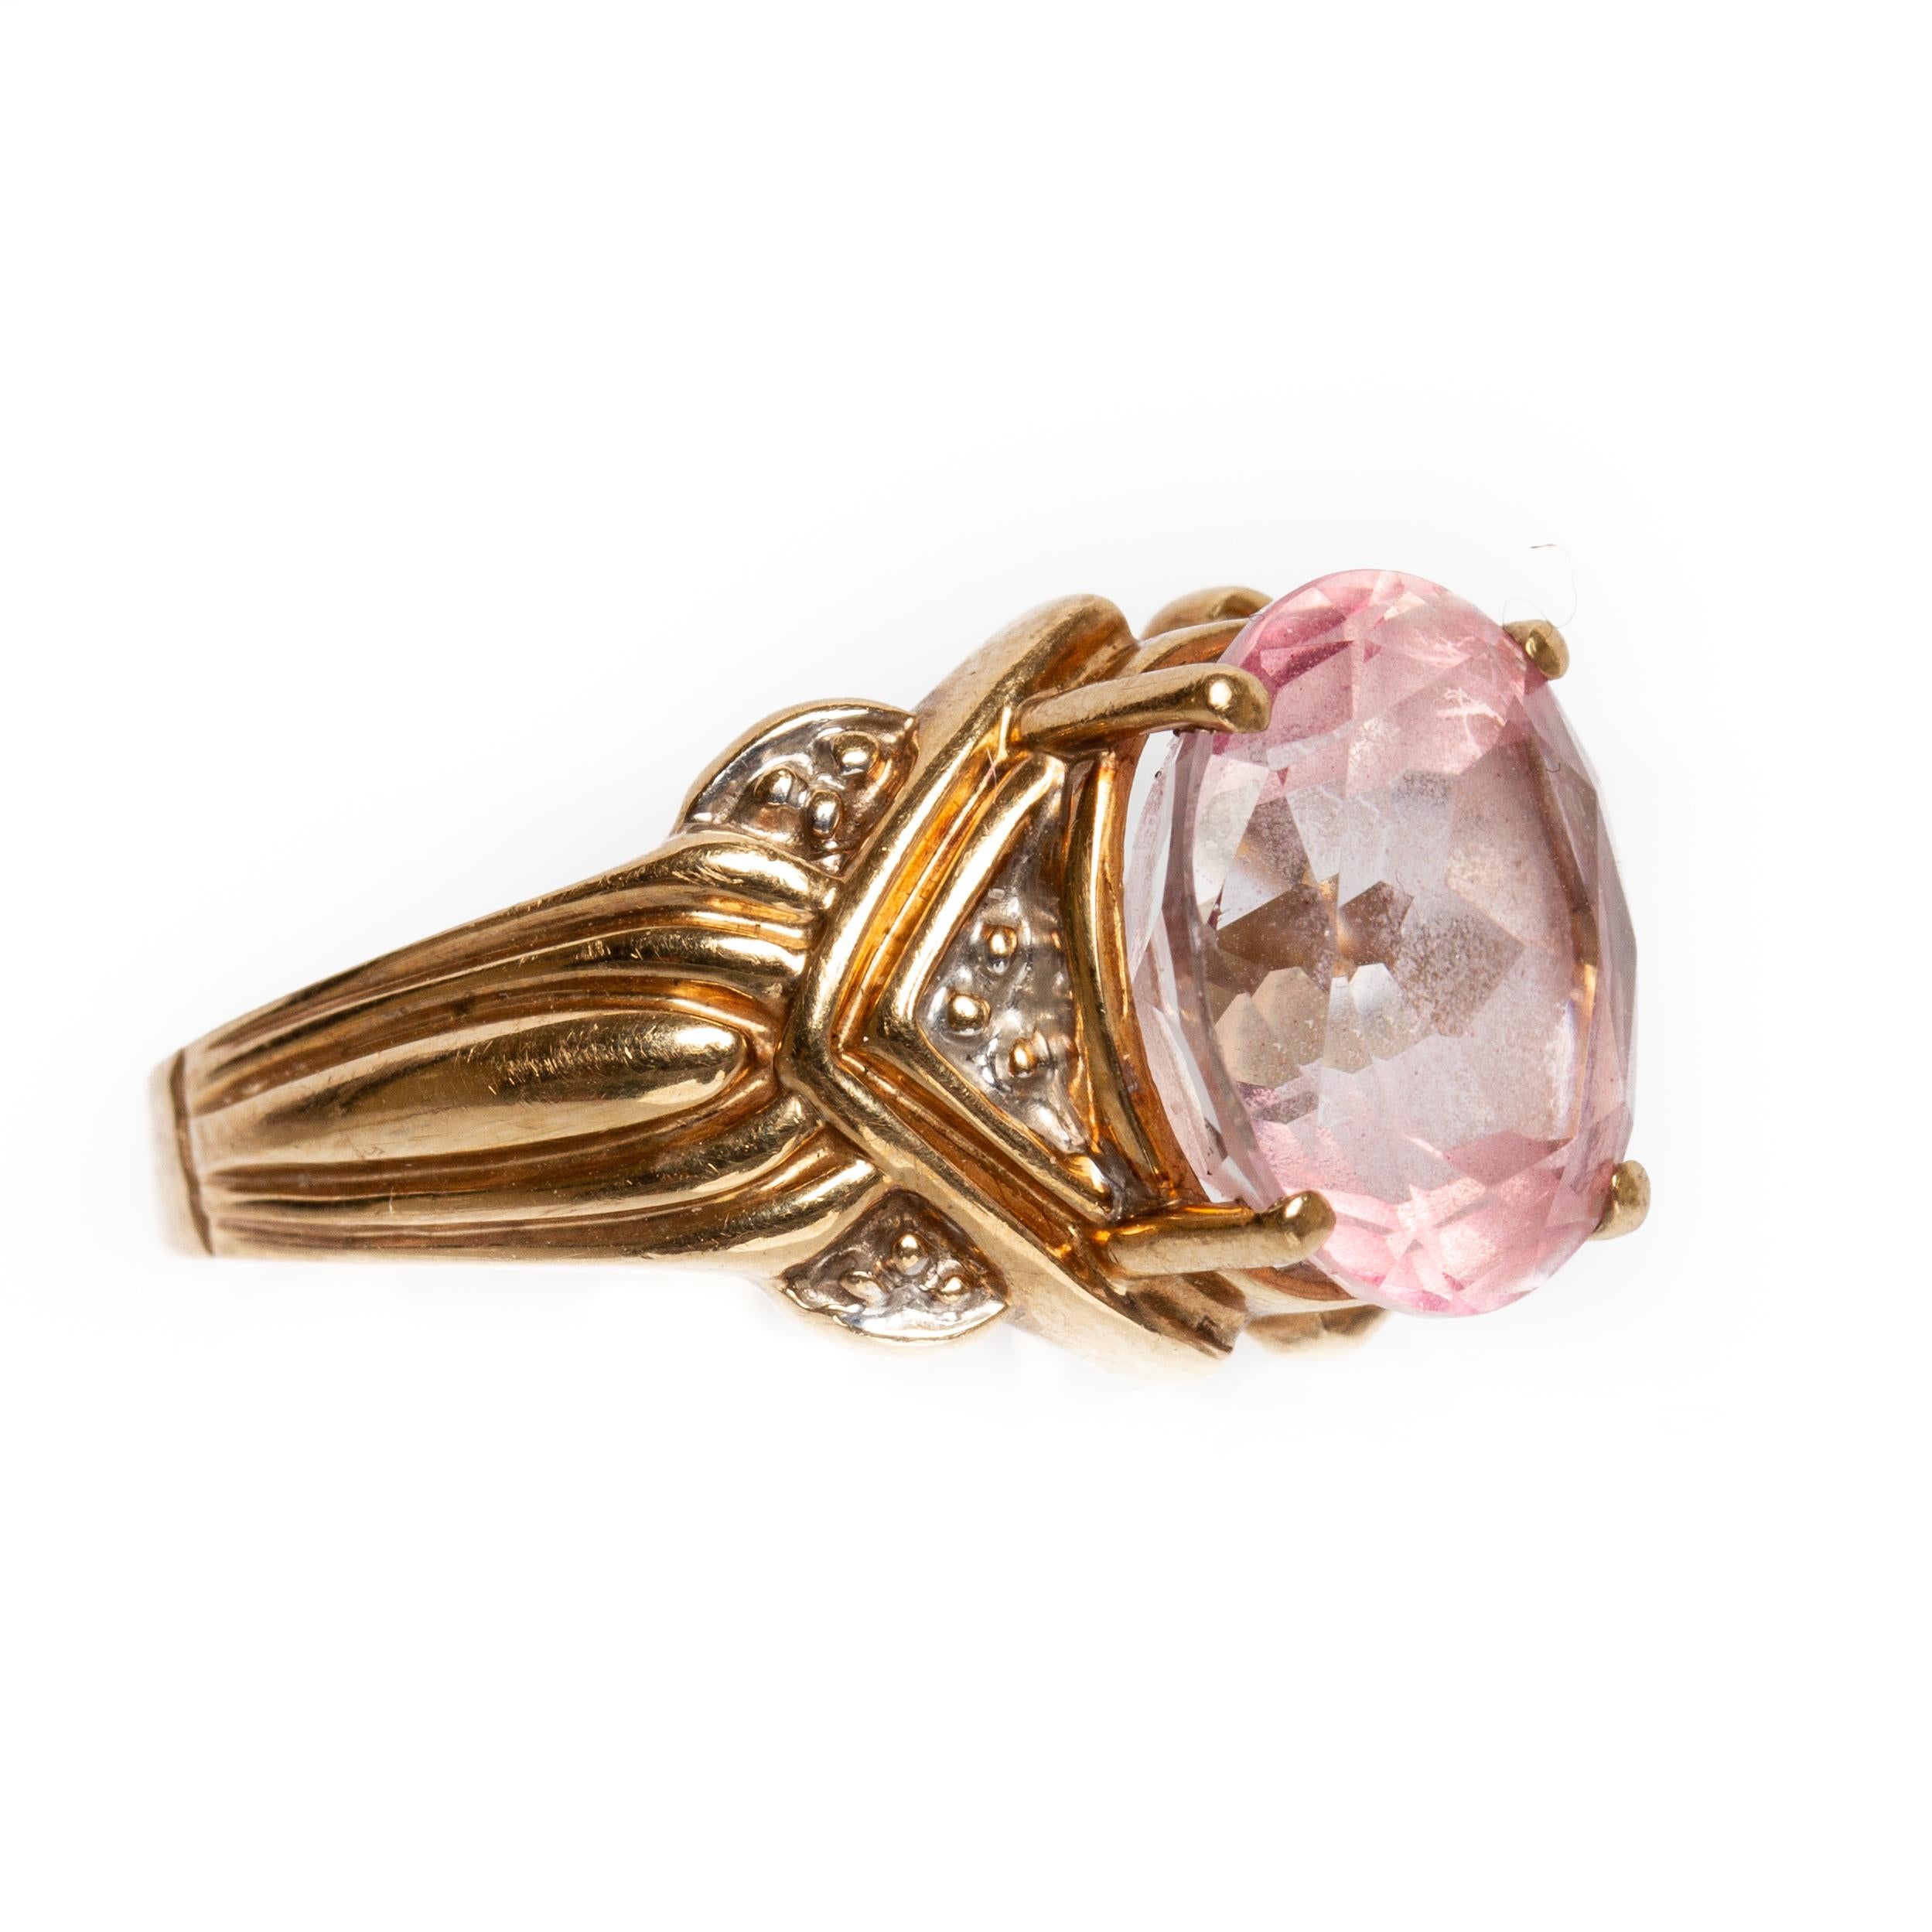 A 10K gold ring with faceted pink sapphire. The ring has an Art Nouveau style with two-tone fluted shoulders and shank. 10K yellow and white gold. Ring Size 8.25. Hallmarks: R 10K. Total Weigh 3.20dwt. 1 Stone, Oval faceted and measures 12.00mm x